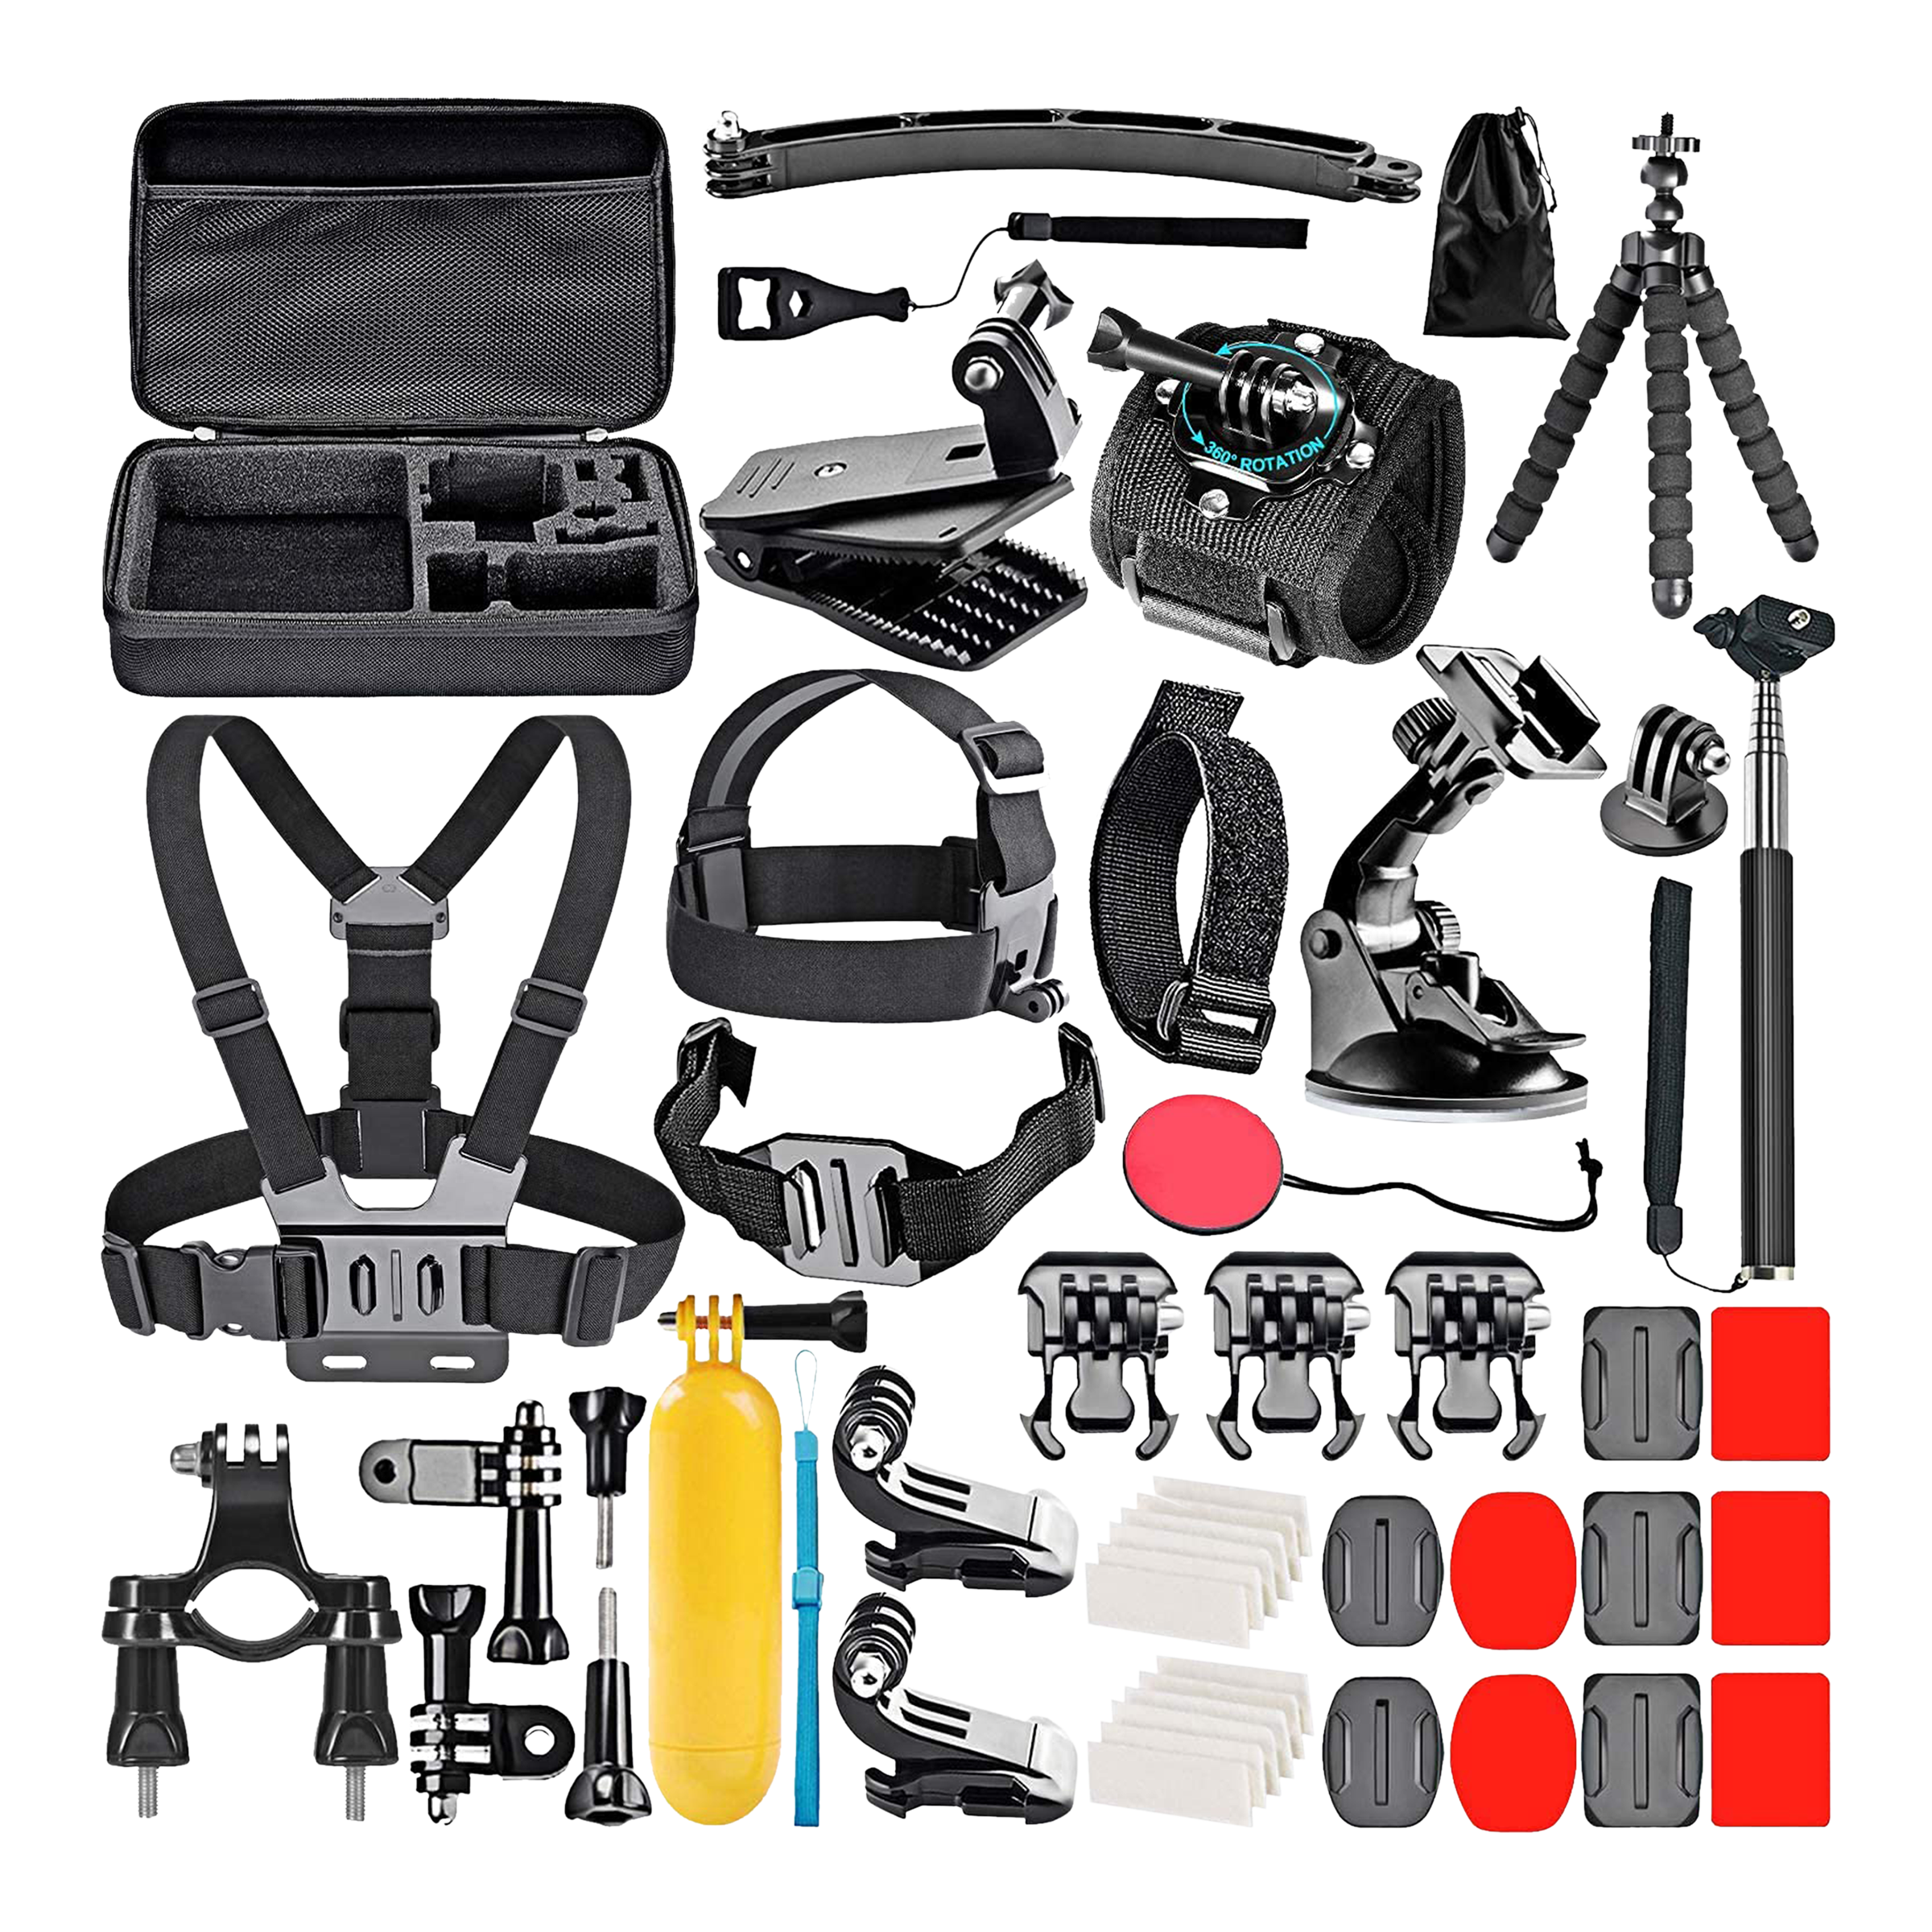 HIFFEN Action Camera Accessories Kit (50-in-1, Black)_1